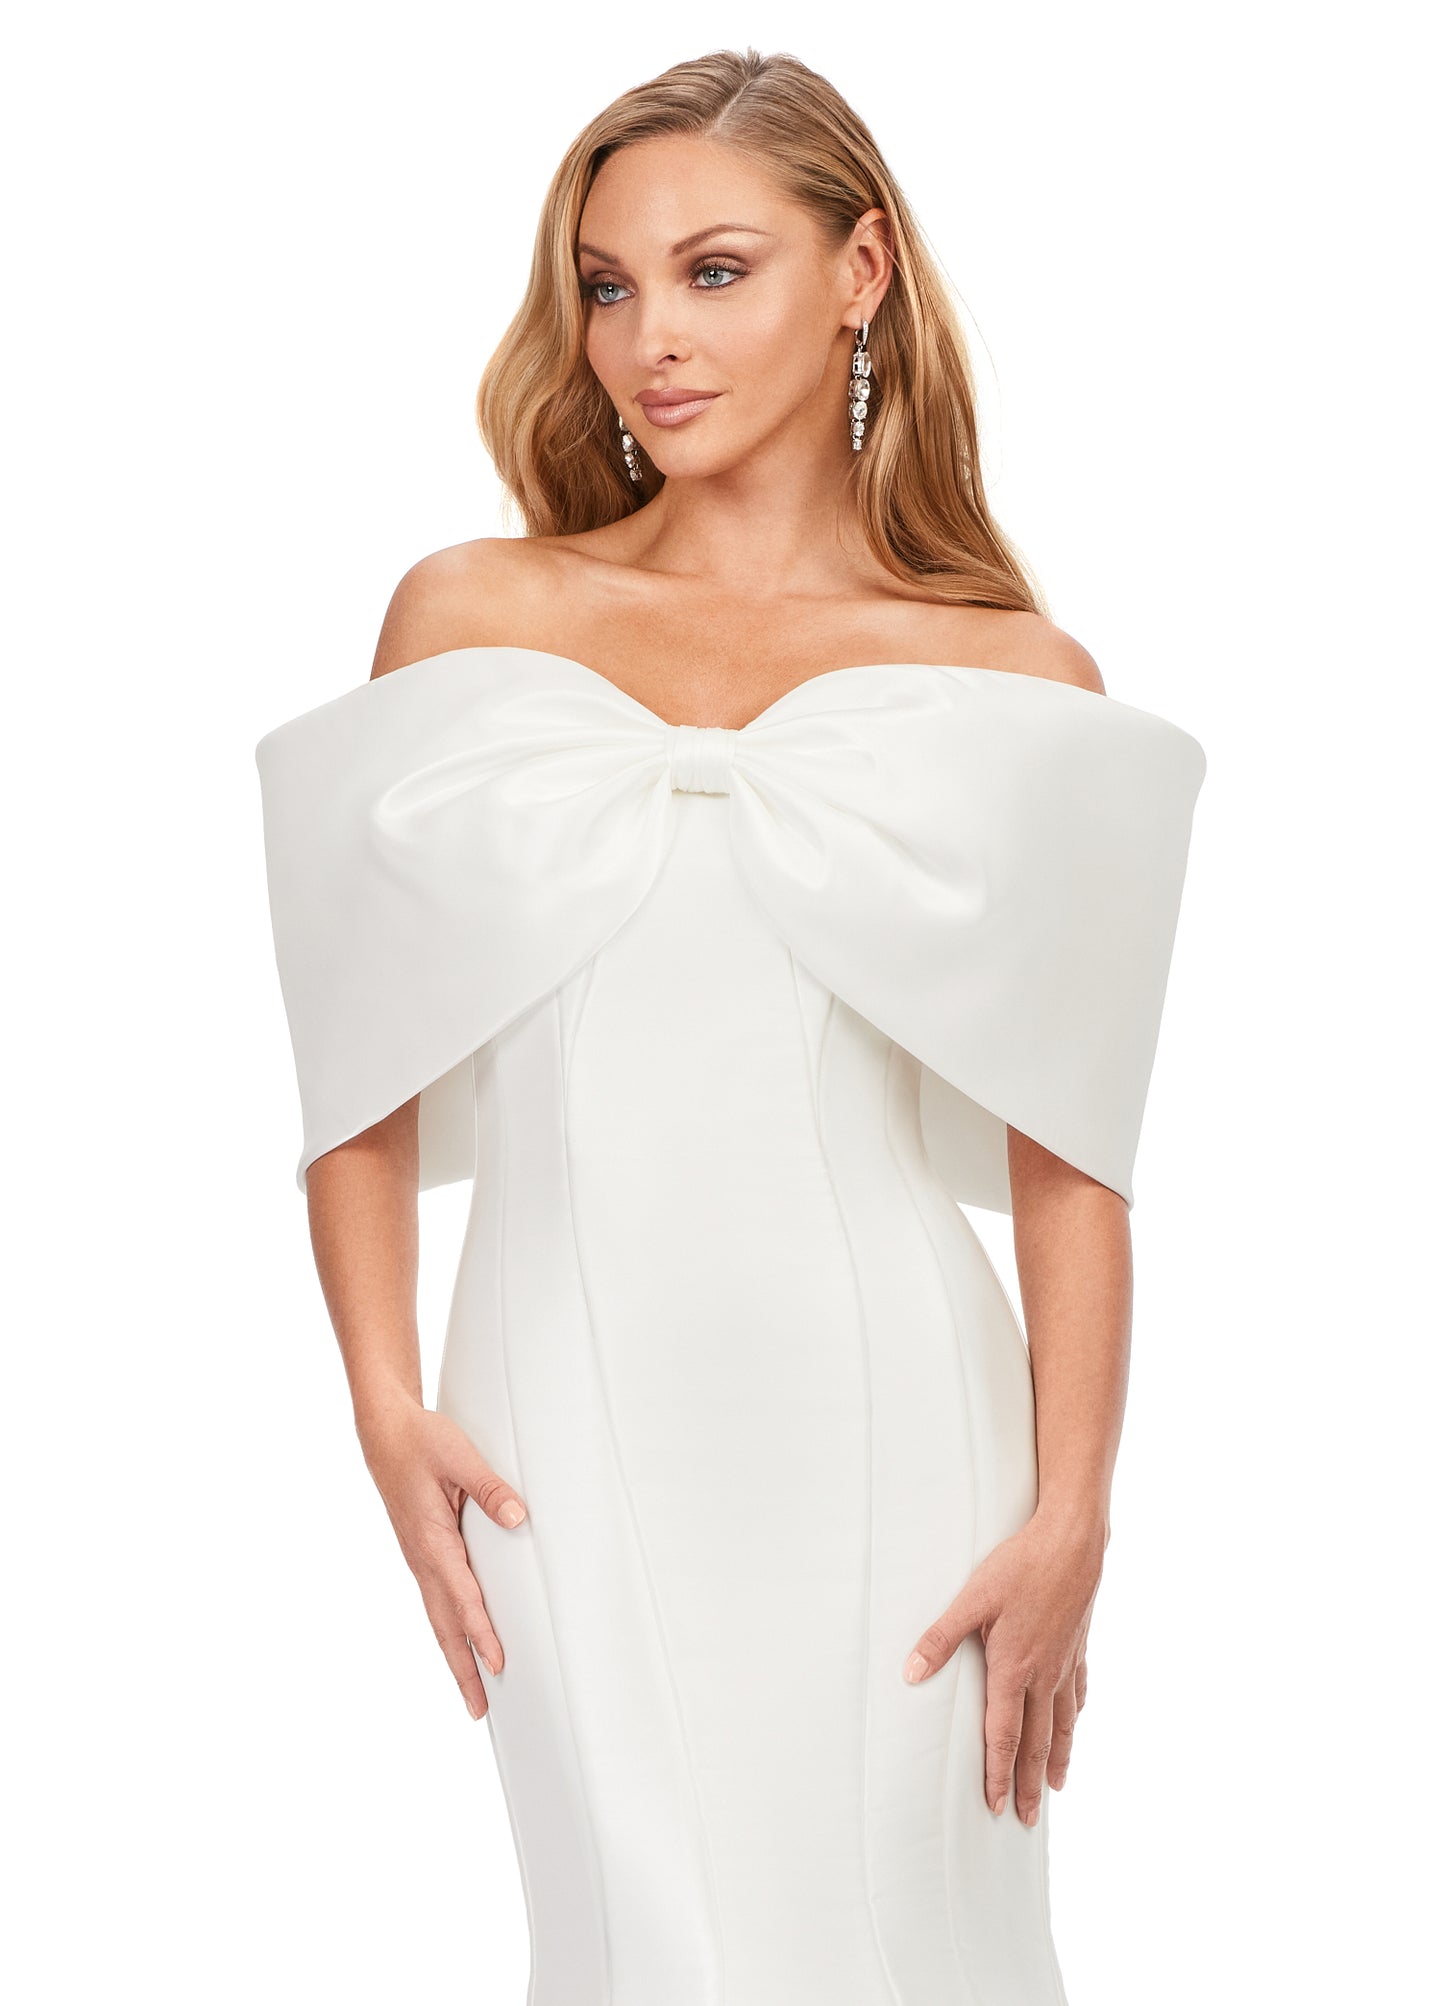 Ashley Lauren 11380 Off The Shoulder Phantom Satin Oversized Bow Long Train Gown Formal Dress. An elegant gown fit for any occasion. The dramatic oversized bow wraps around creating an off shoulder silhouette. The back seam is adorned with buttons.